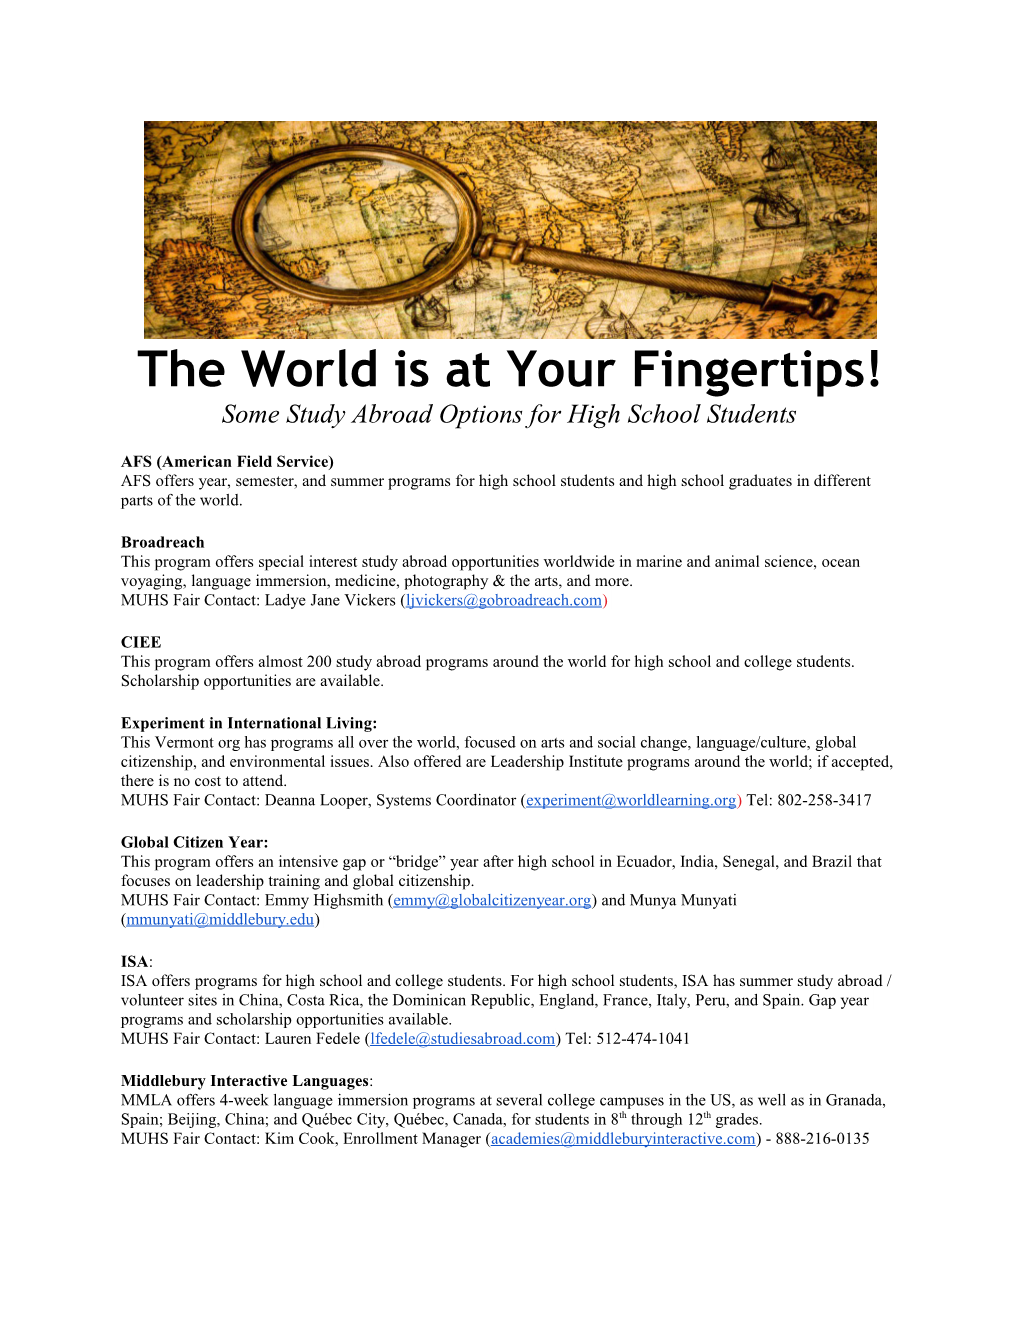 The World Is at Your Fingertips!